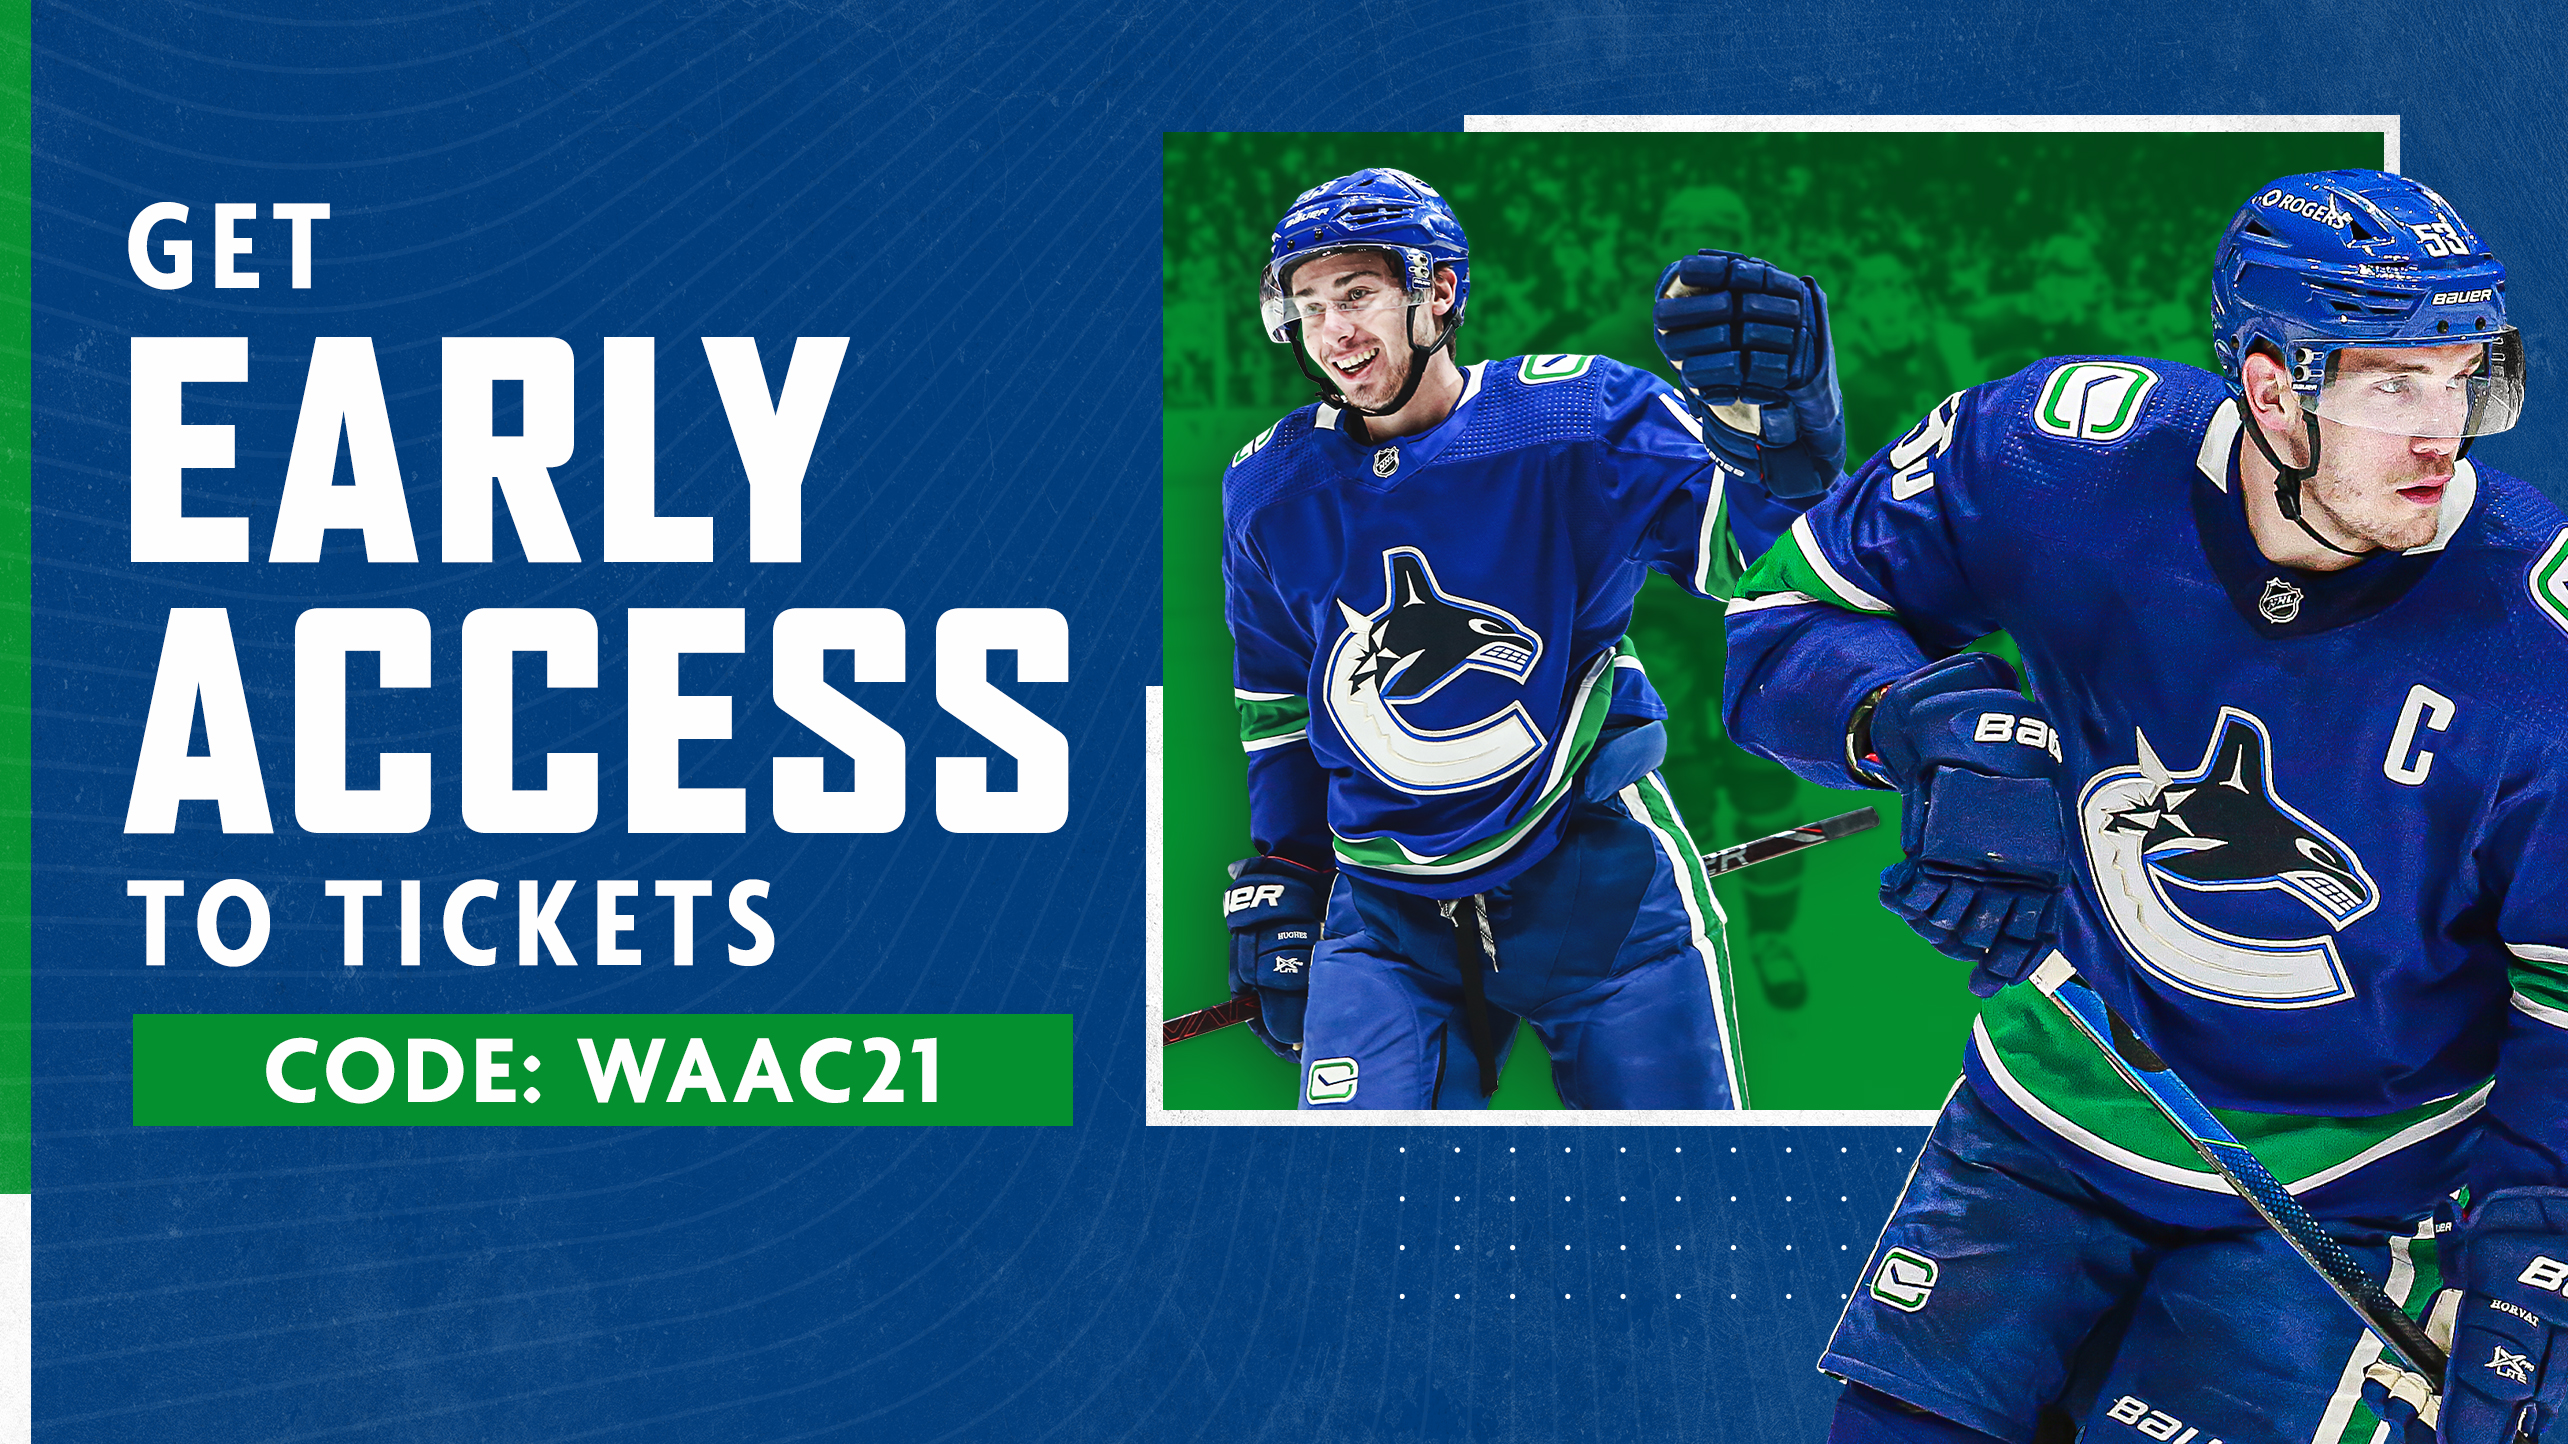 Canucks - Single Game Tickets On Sale